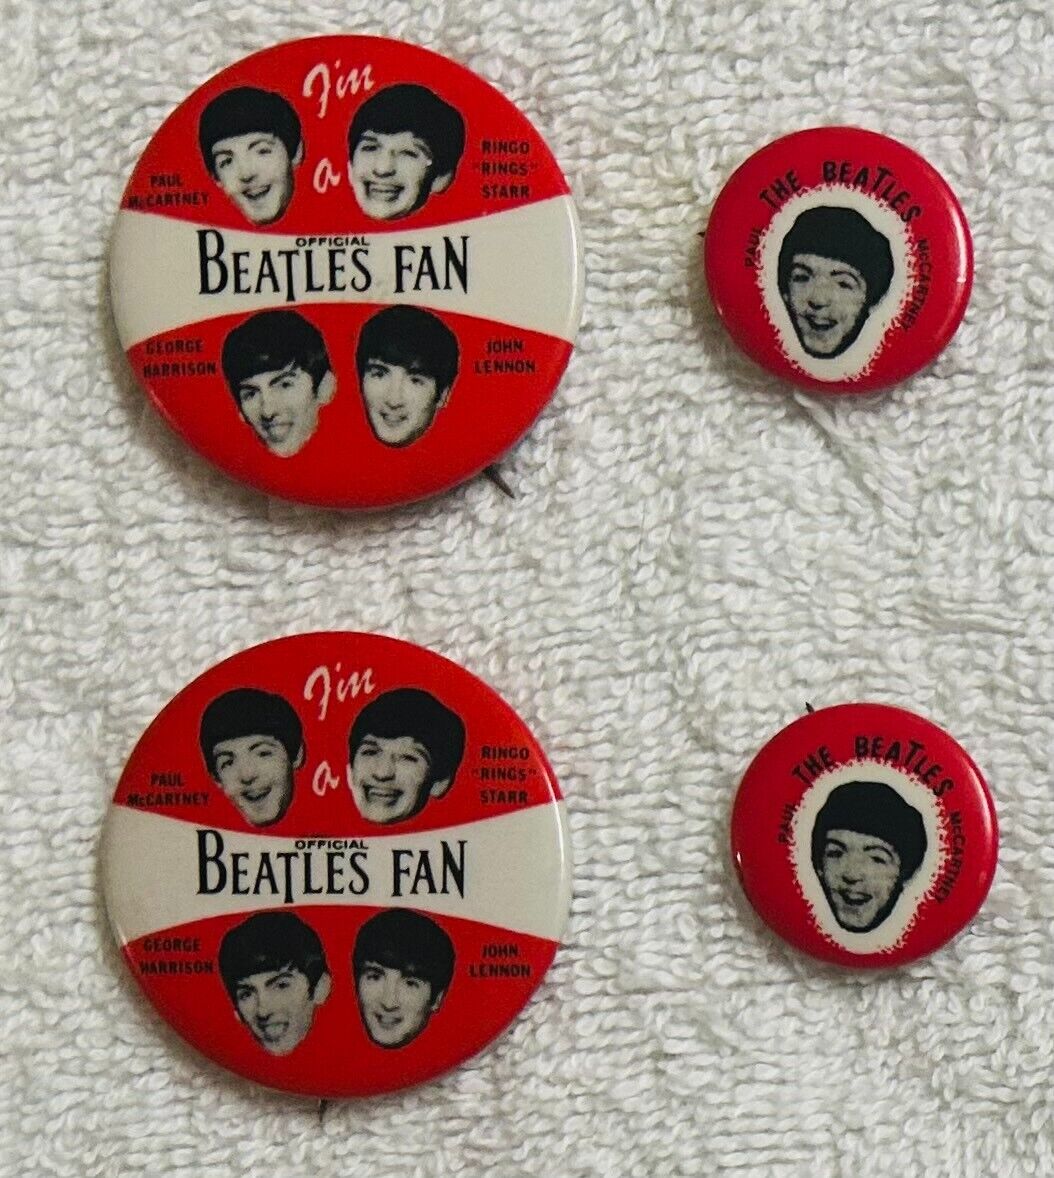 THE BEATLES Lot of 4 Pin-Back Buttons 1964 I'M A BEATLES FAN & PAUL McARTNEY